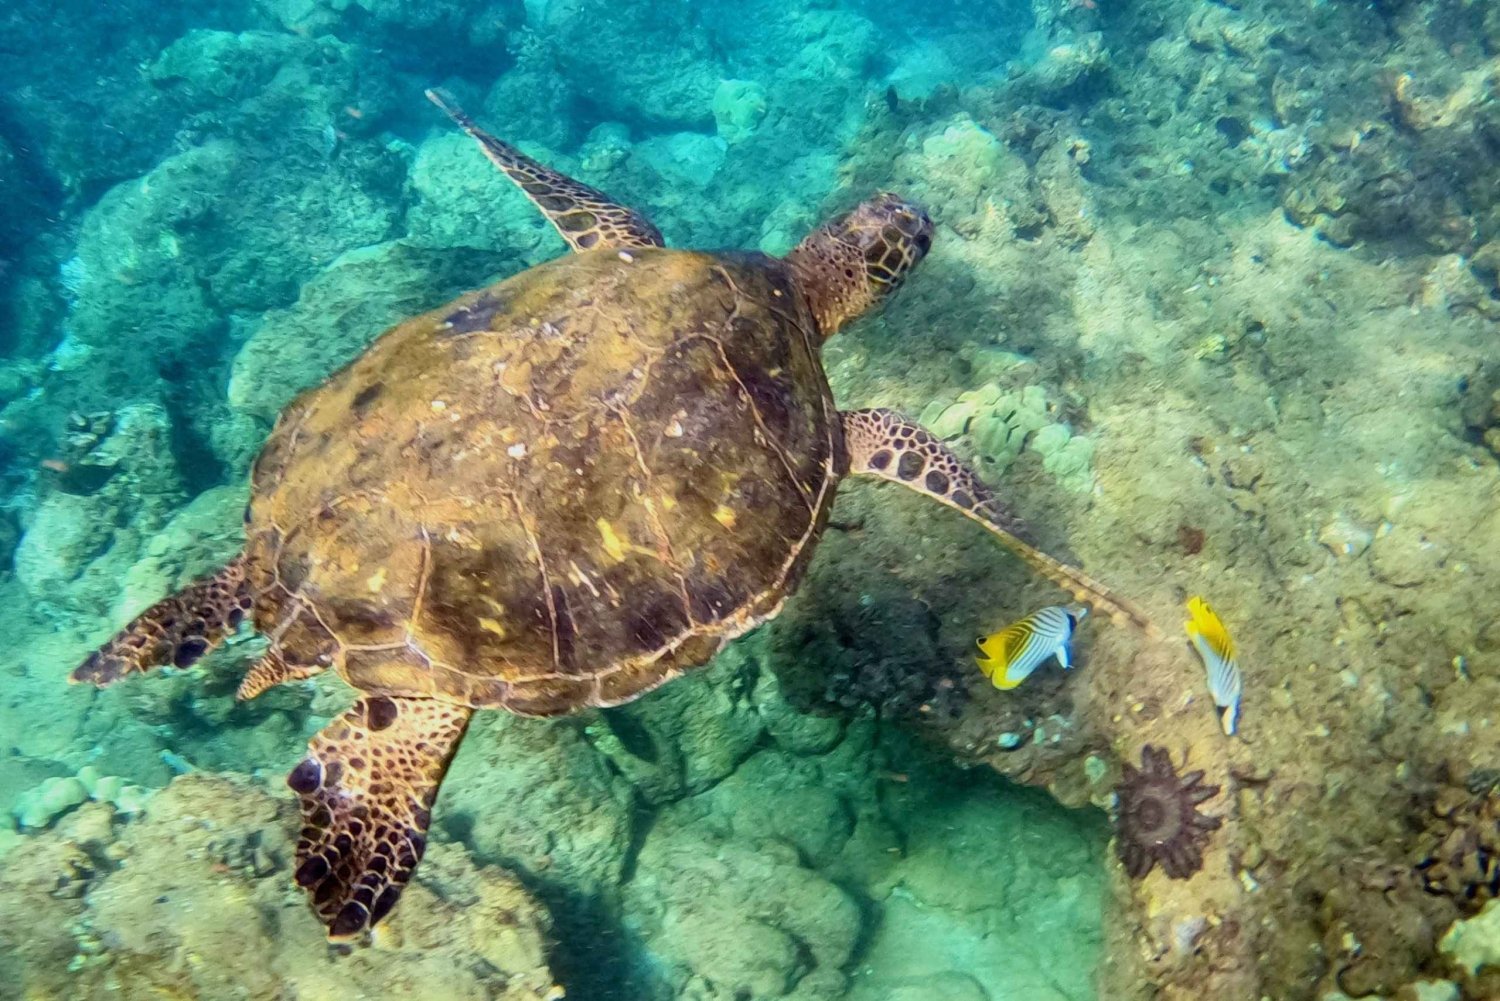 South Maui: Snorkeling Tour for Non-Swimmers in Wailea Beach